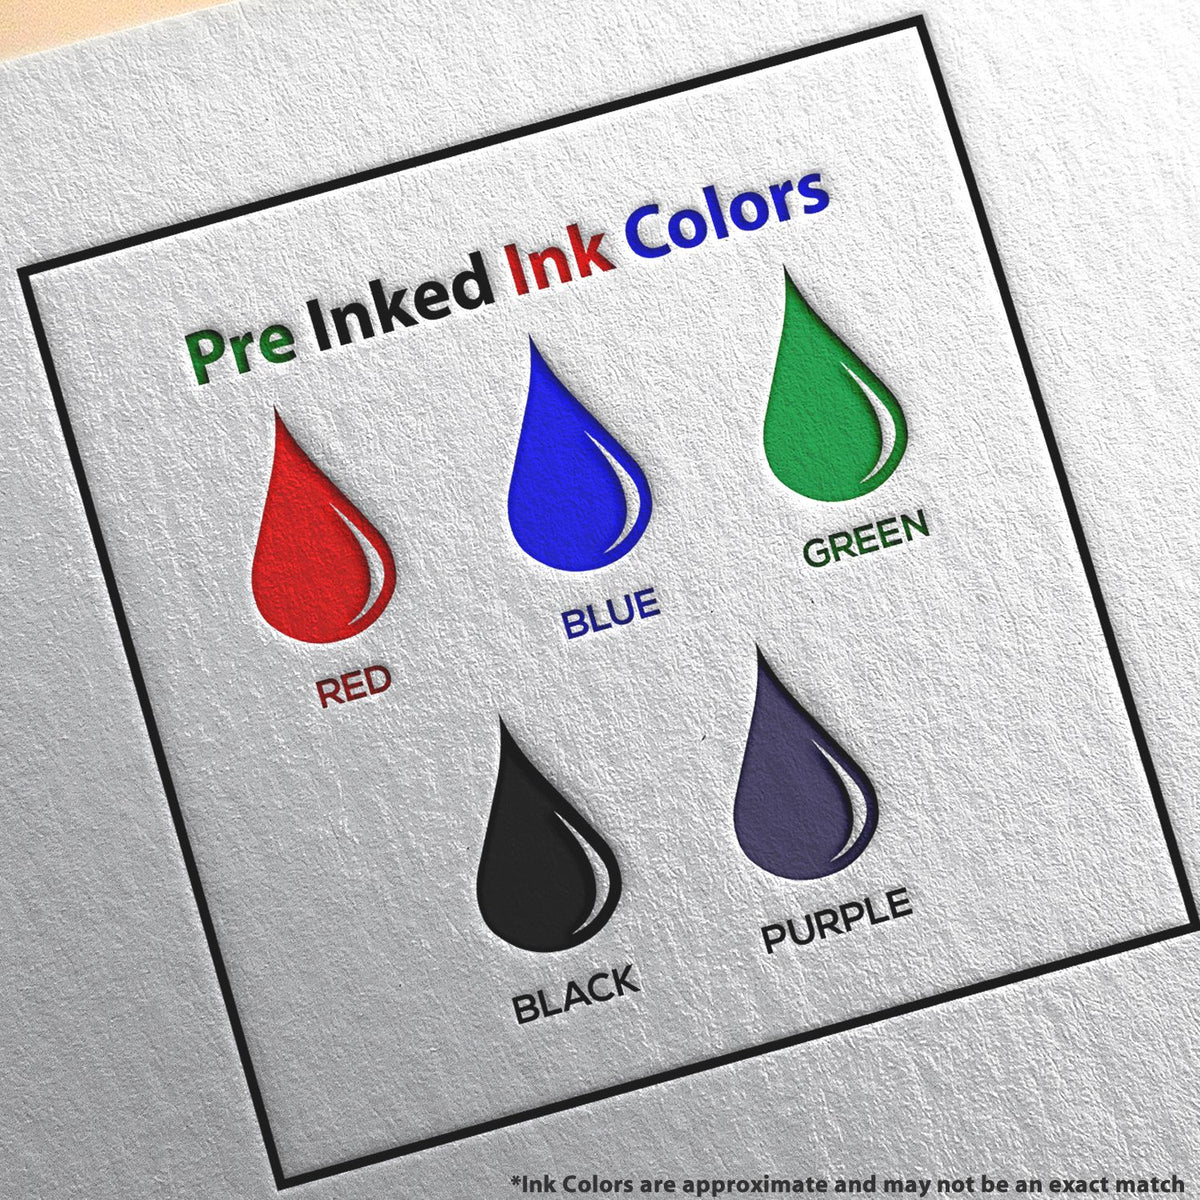 A picture showing the different ink colors or hues available for the Slim Pre-Inked Washington Land Surveyor Seal Stamp product.